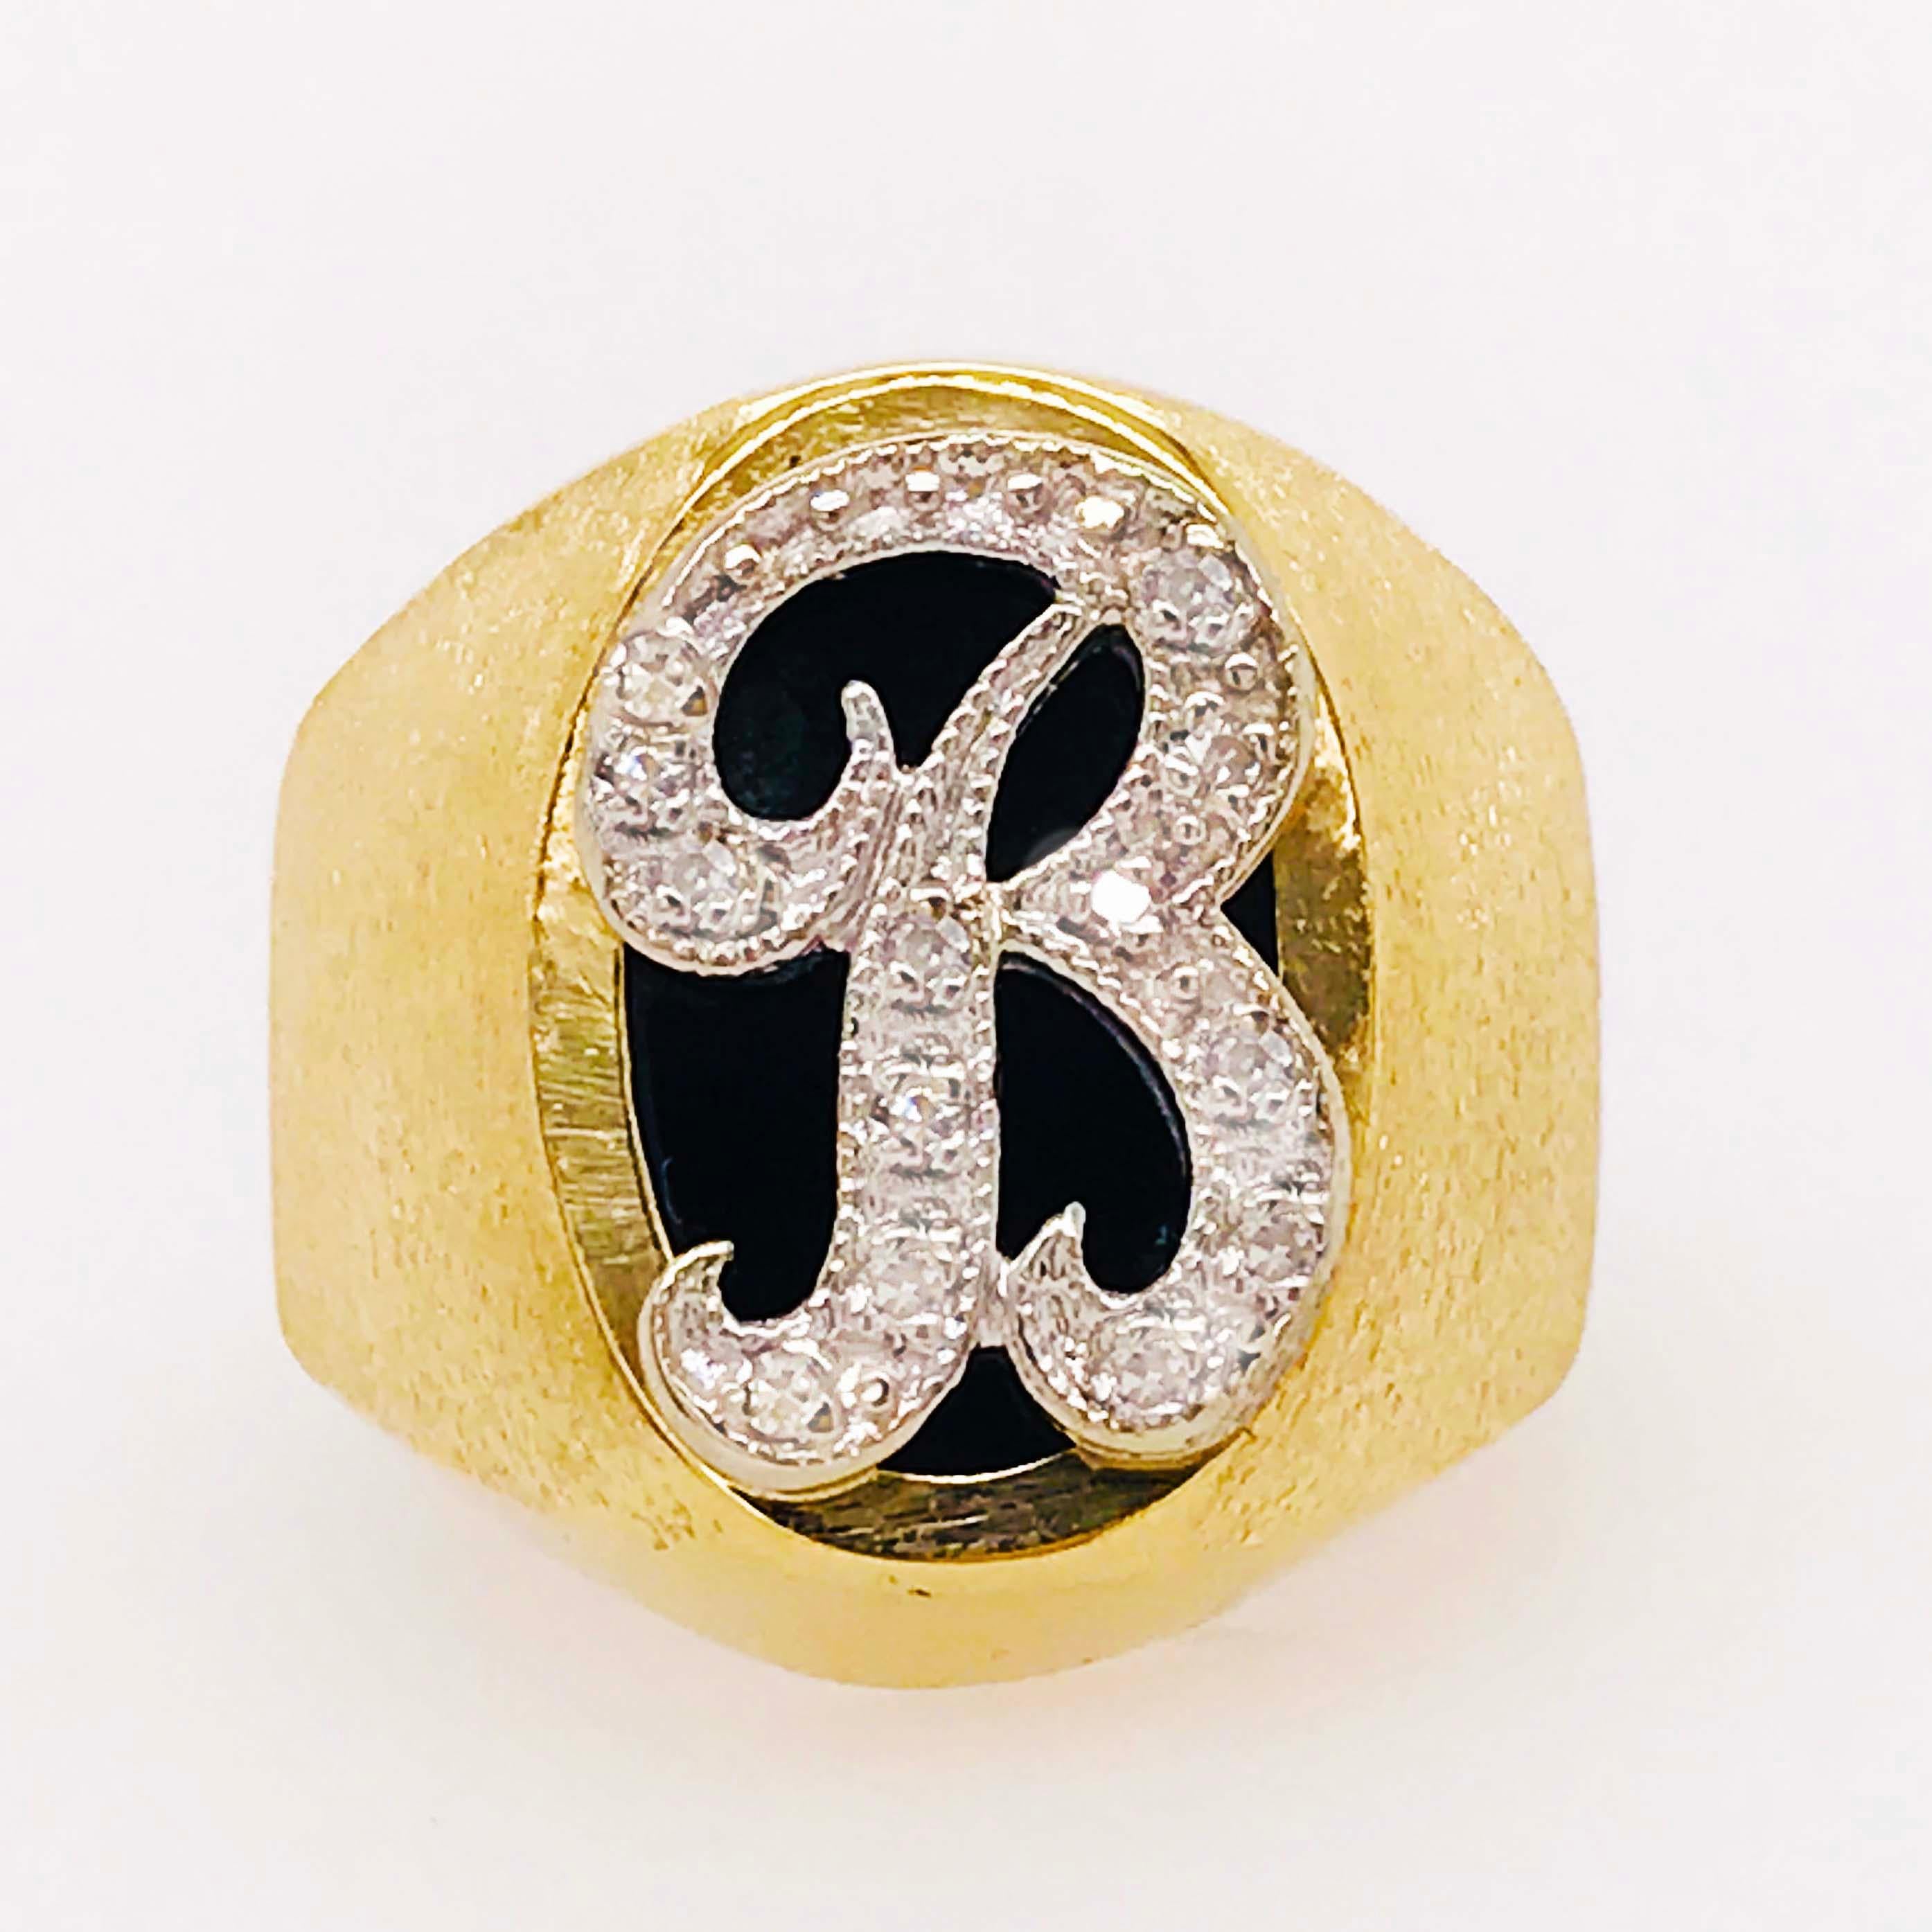 The diamond B Signet ring is a custom piece that has been handmade with precious metal and genuine round diamonds! This gold signet ring has a diamond pave 